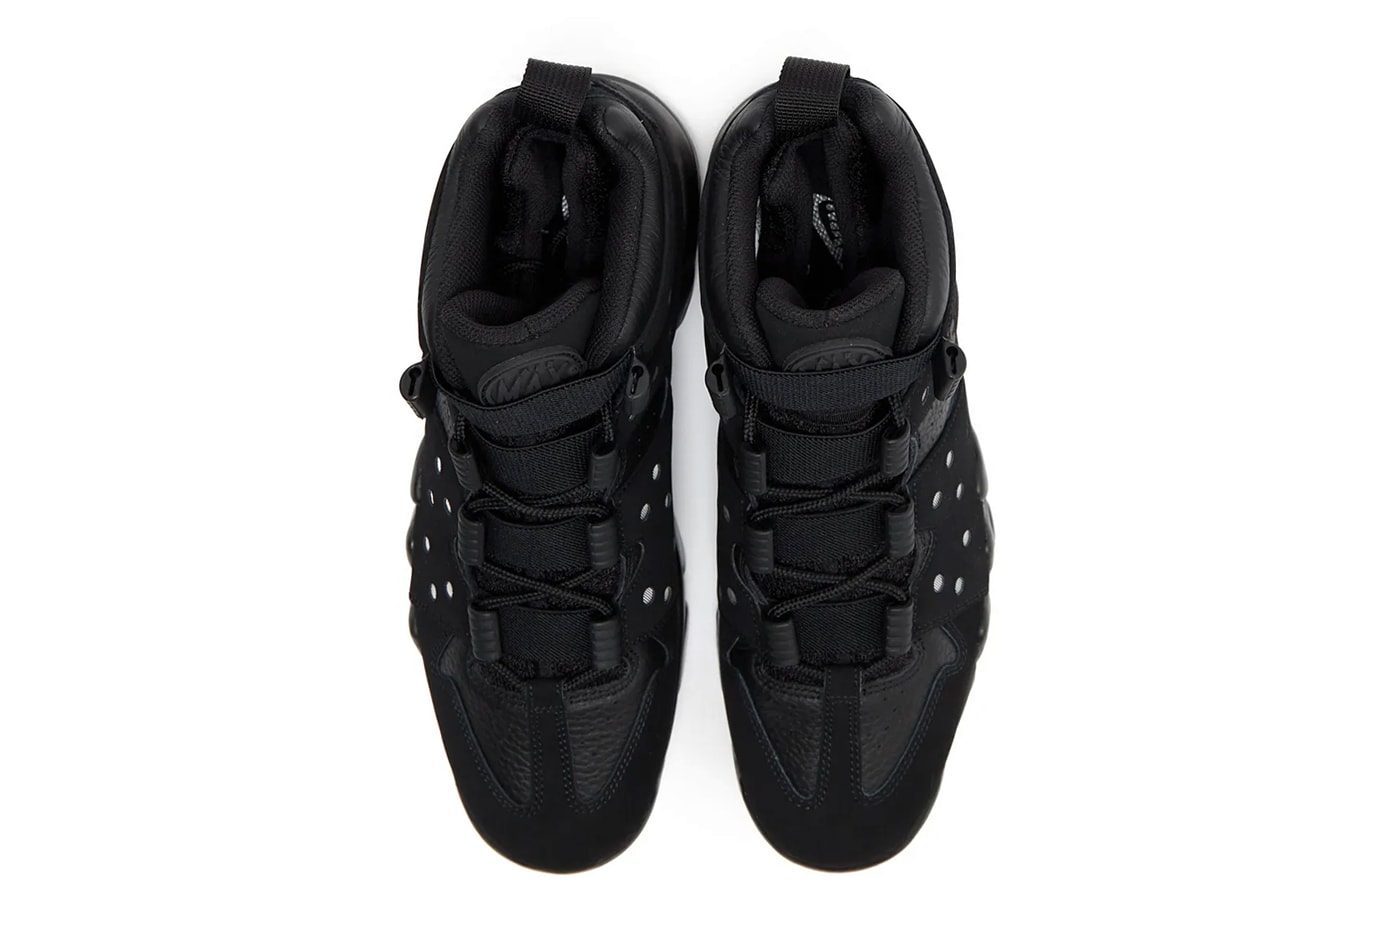 Take a First Look at the Nike Air Max CB 94 "Black/Dark Charcoal" charles barkely 